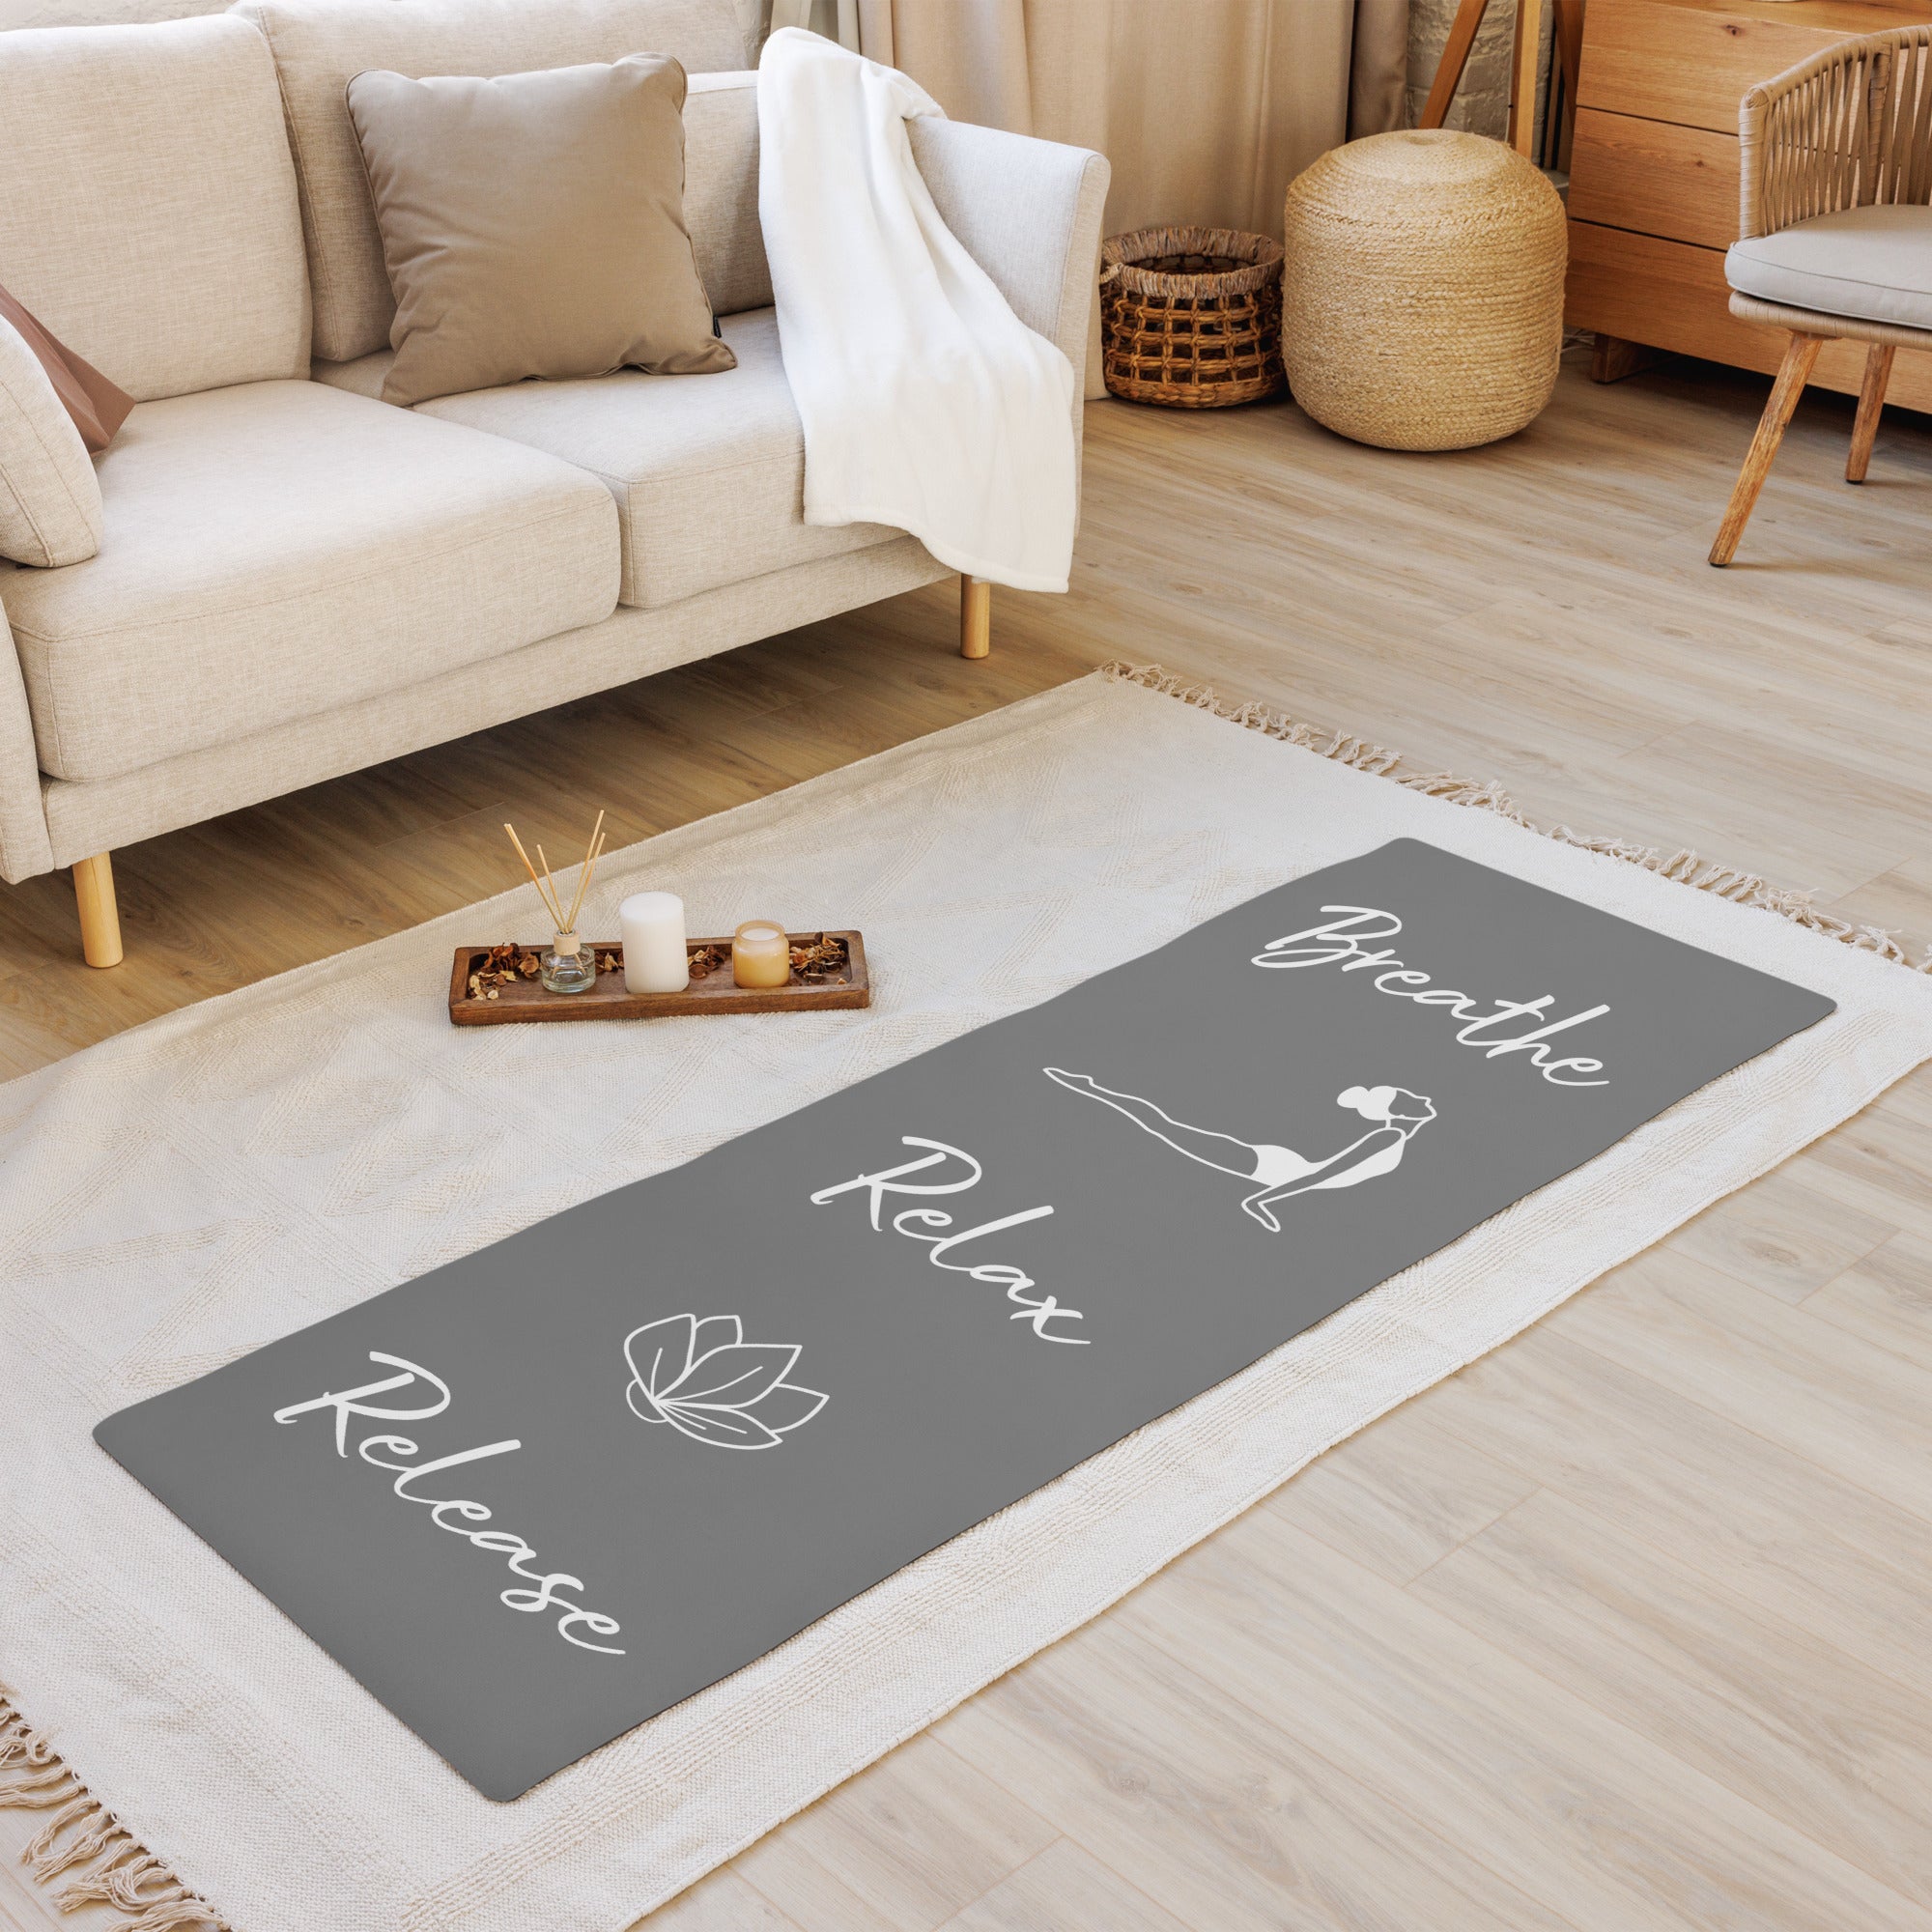 Breathe Relax Release-exercise mat (gray)